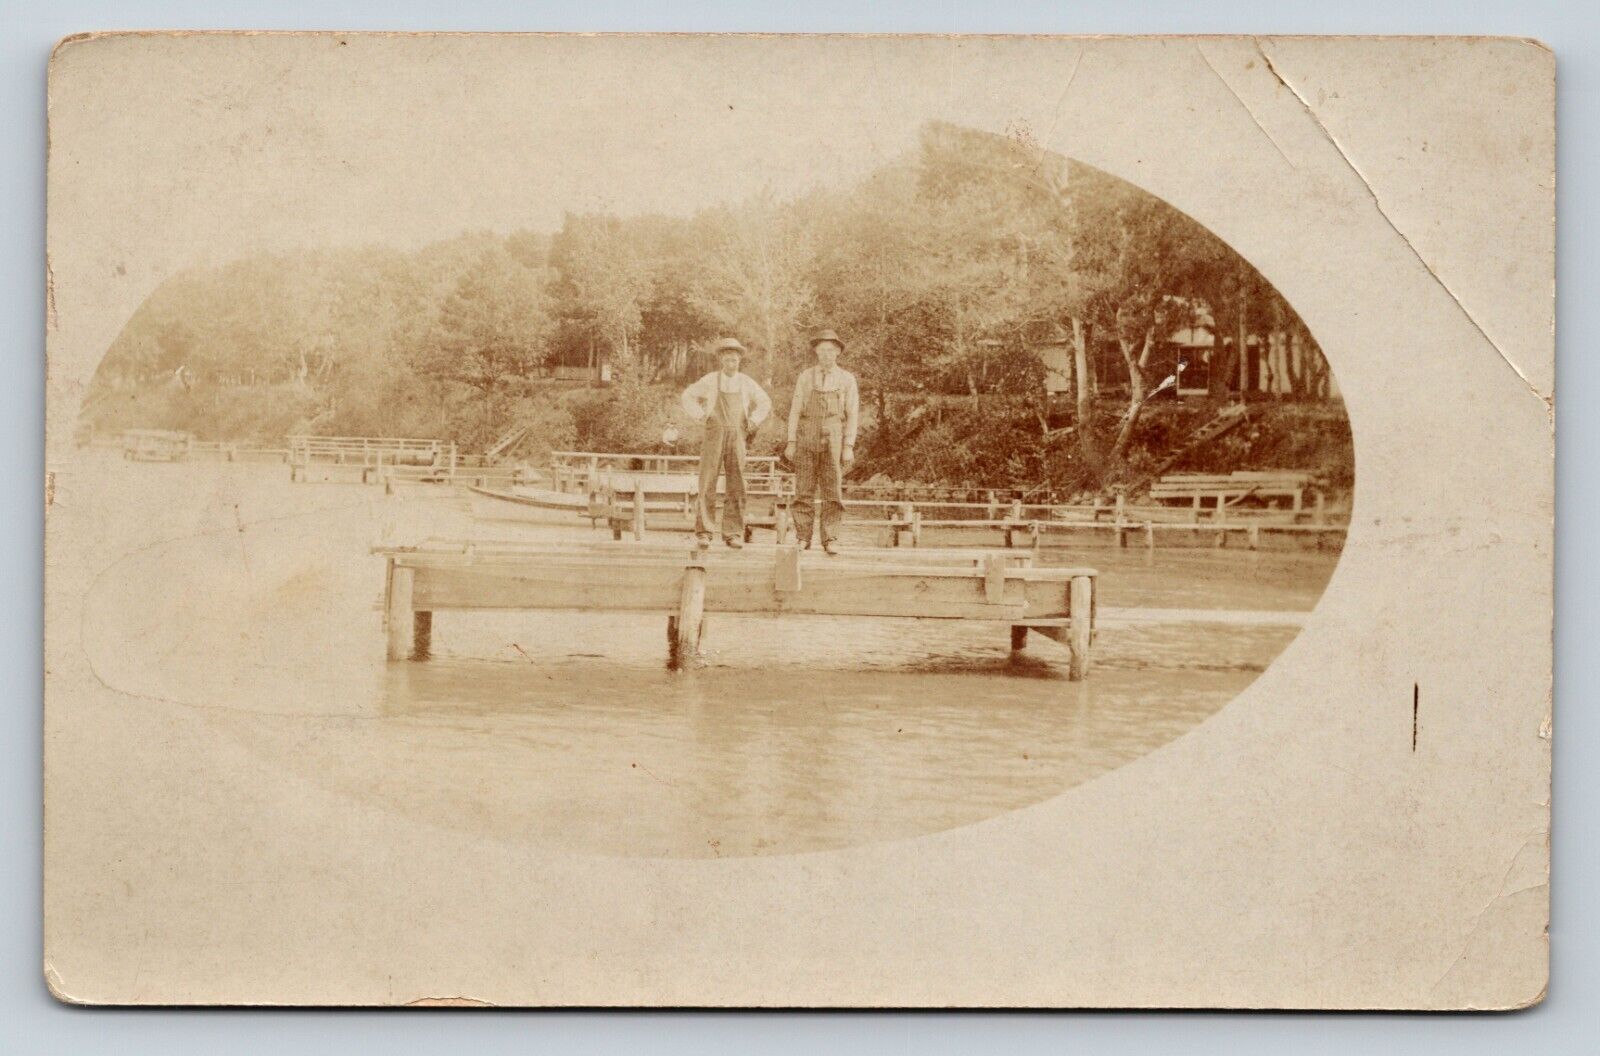 RPPC Two Men in Overalls & Hats Stand on Dock VINTAGE Postcard 1341